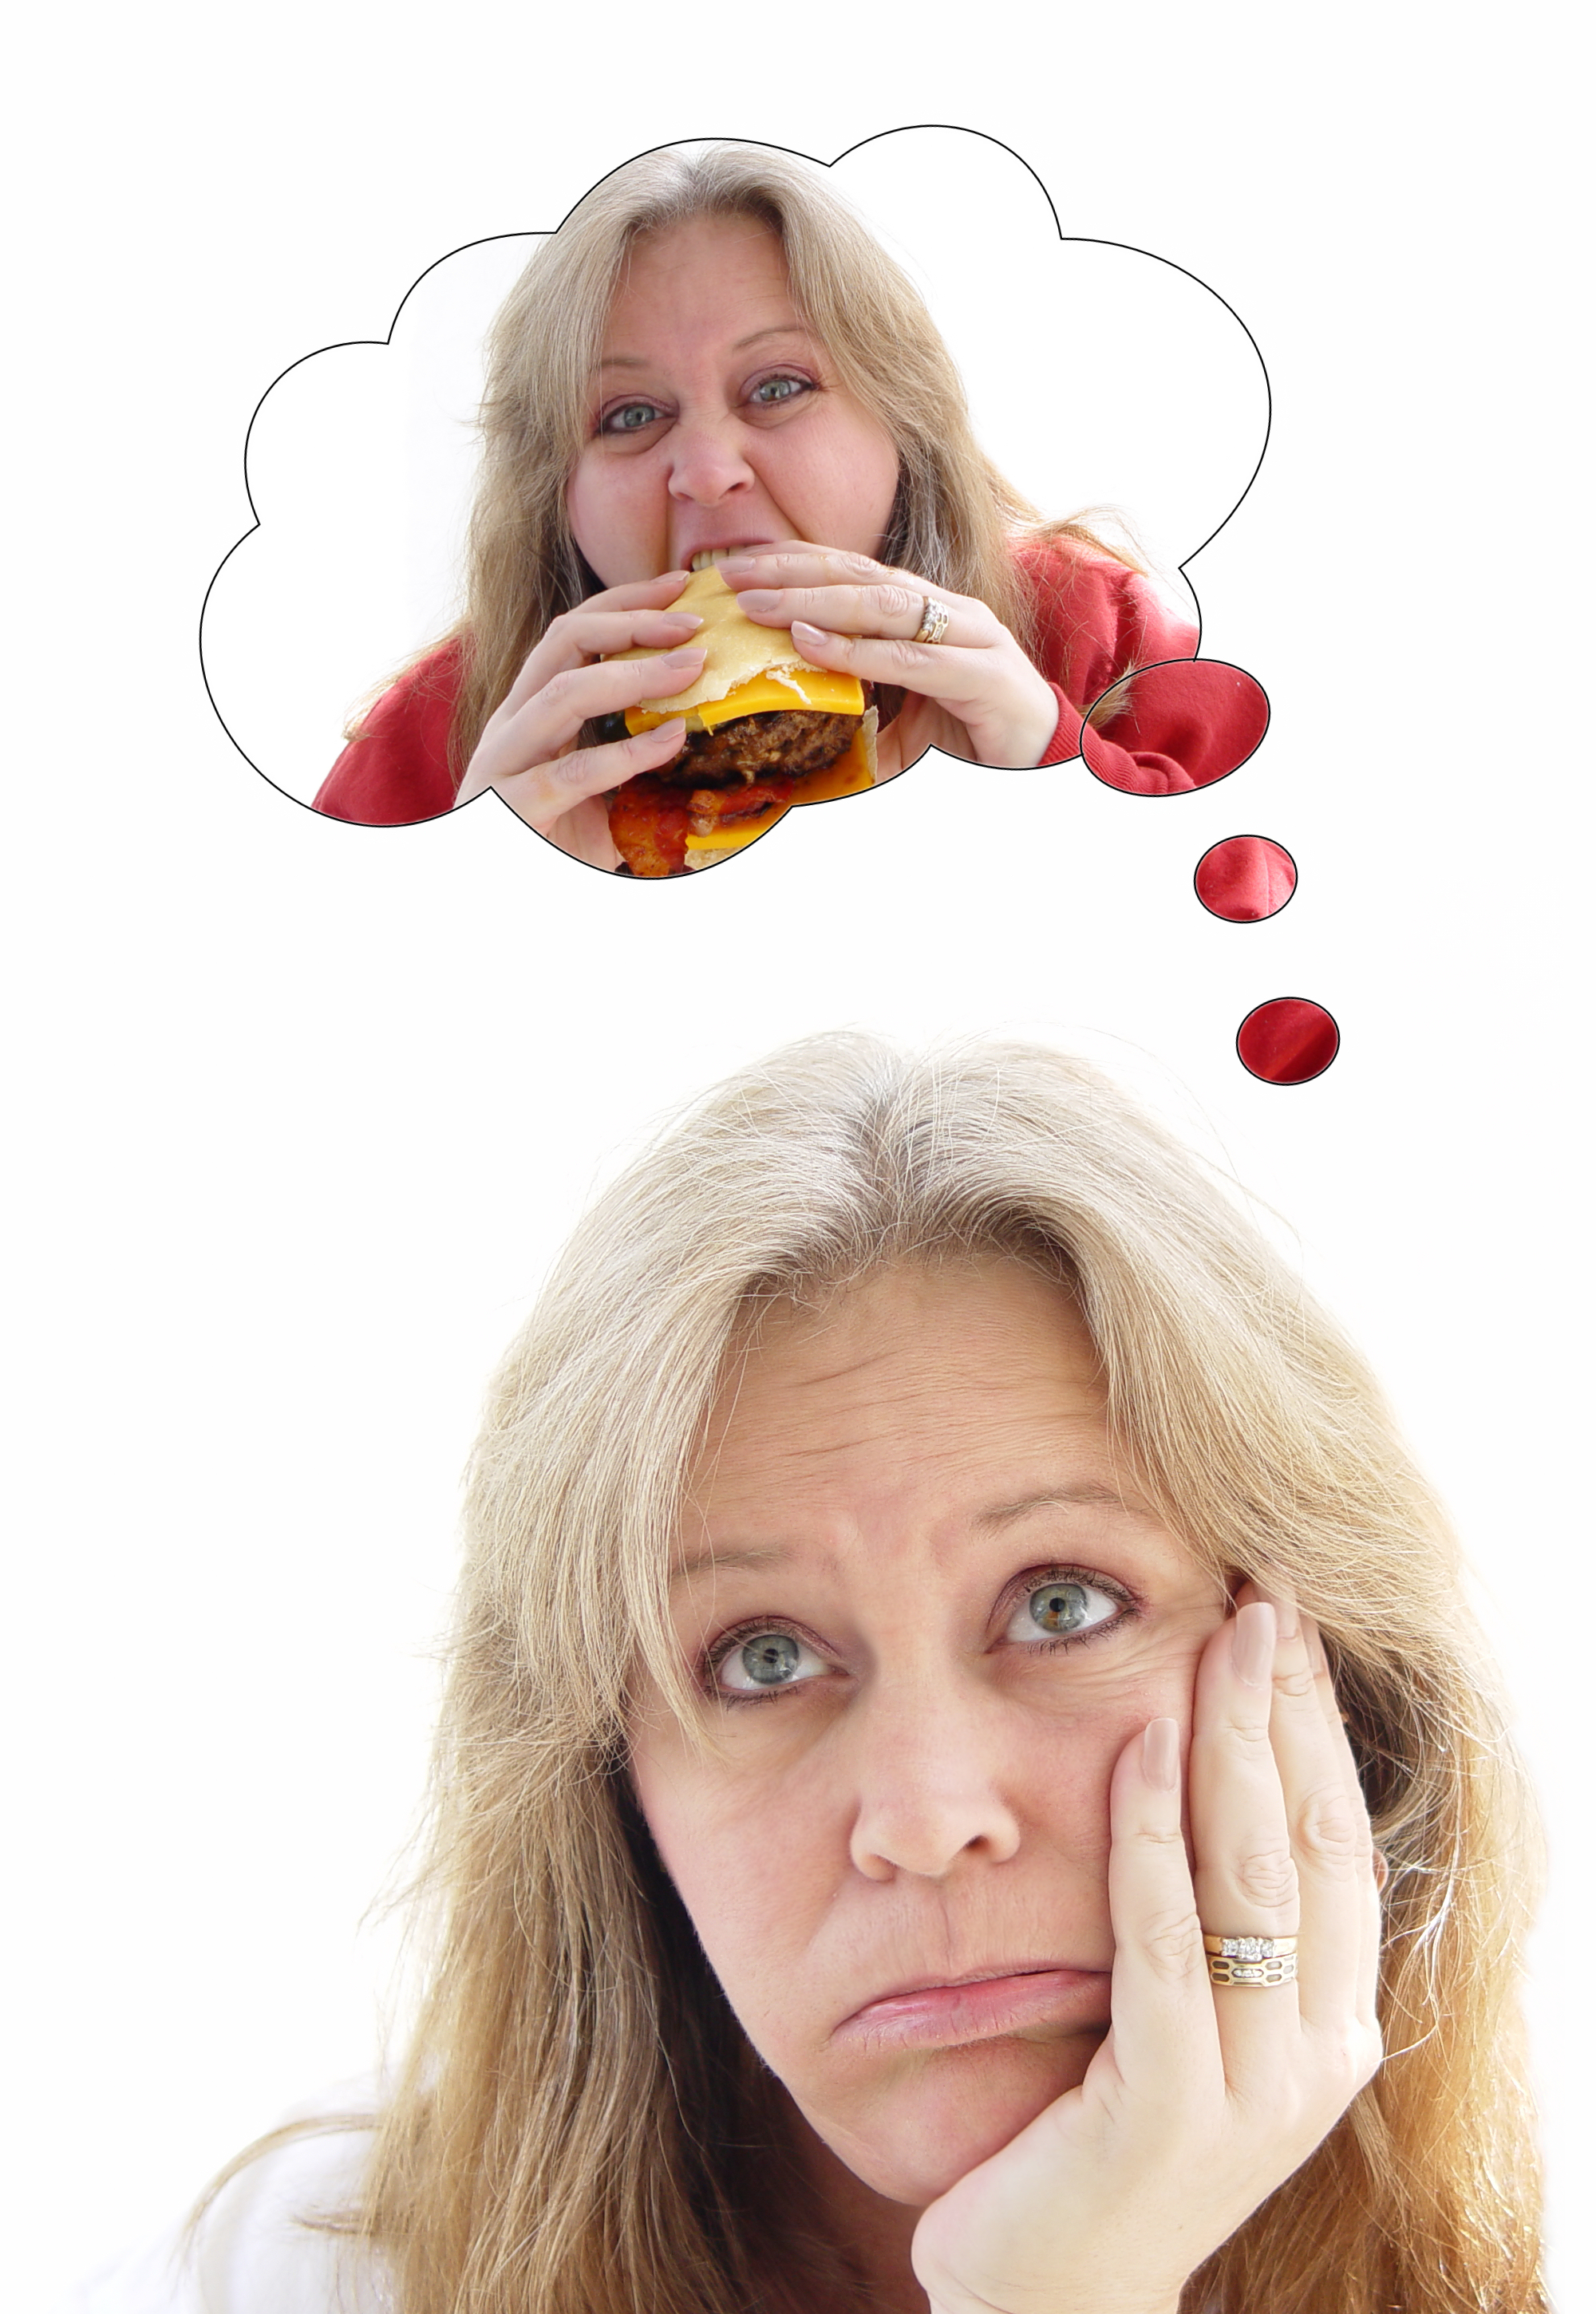 A New Approach to Binge Eating Disorder Treatment?